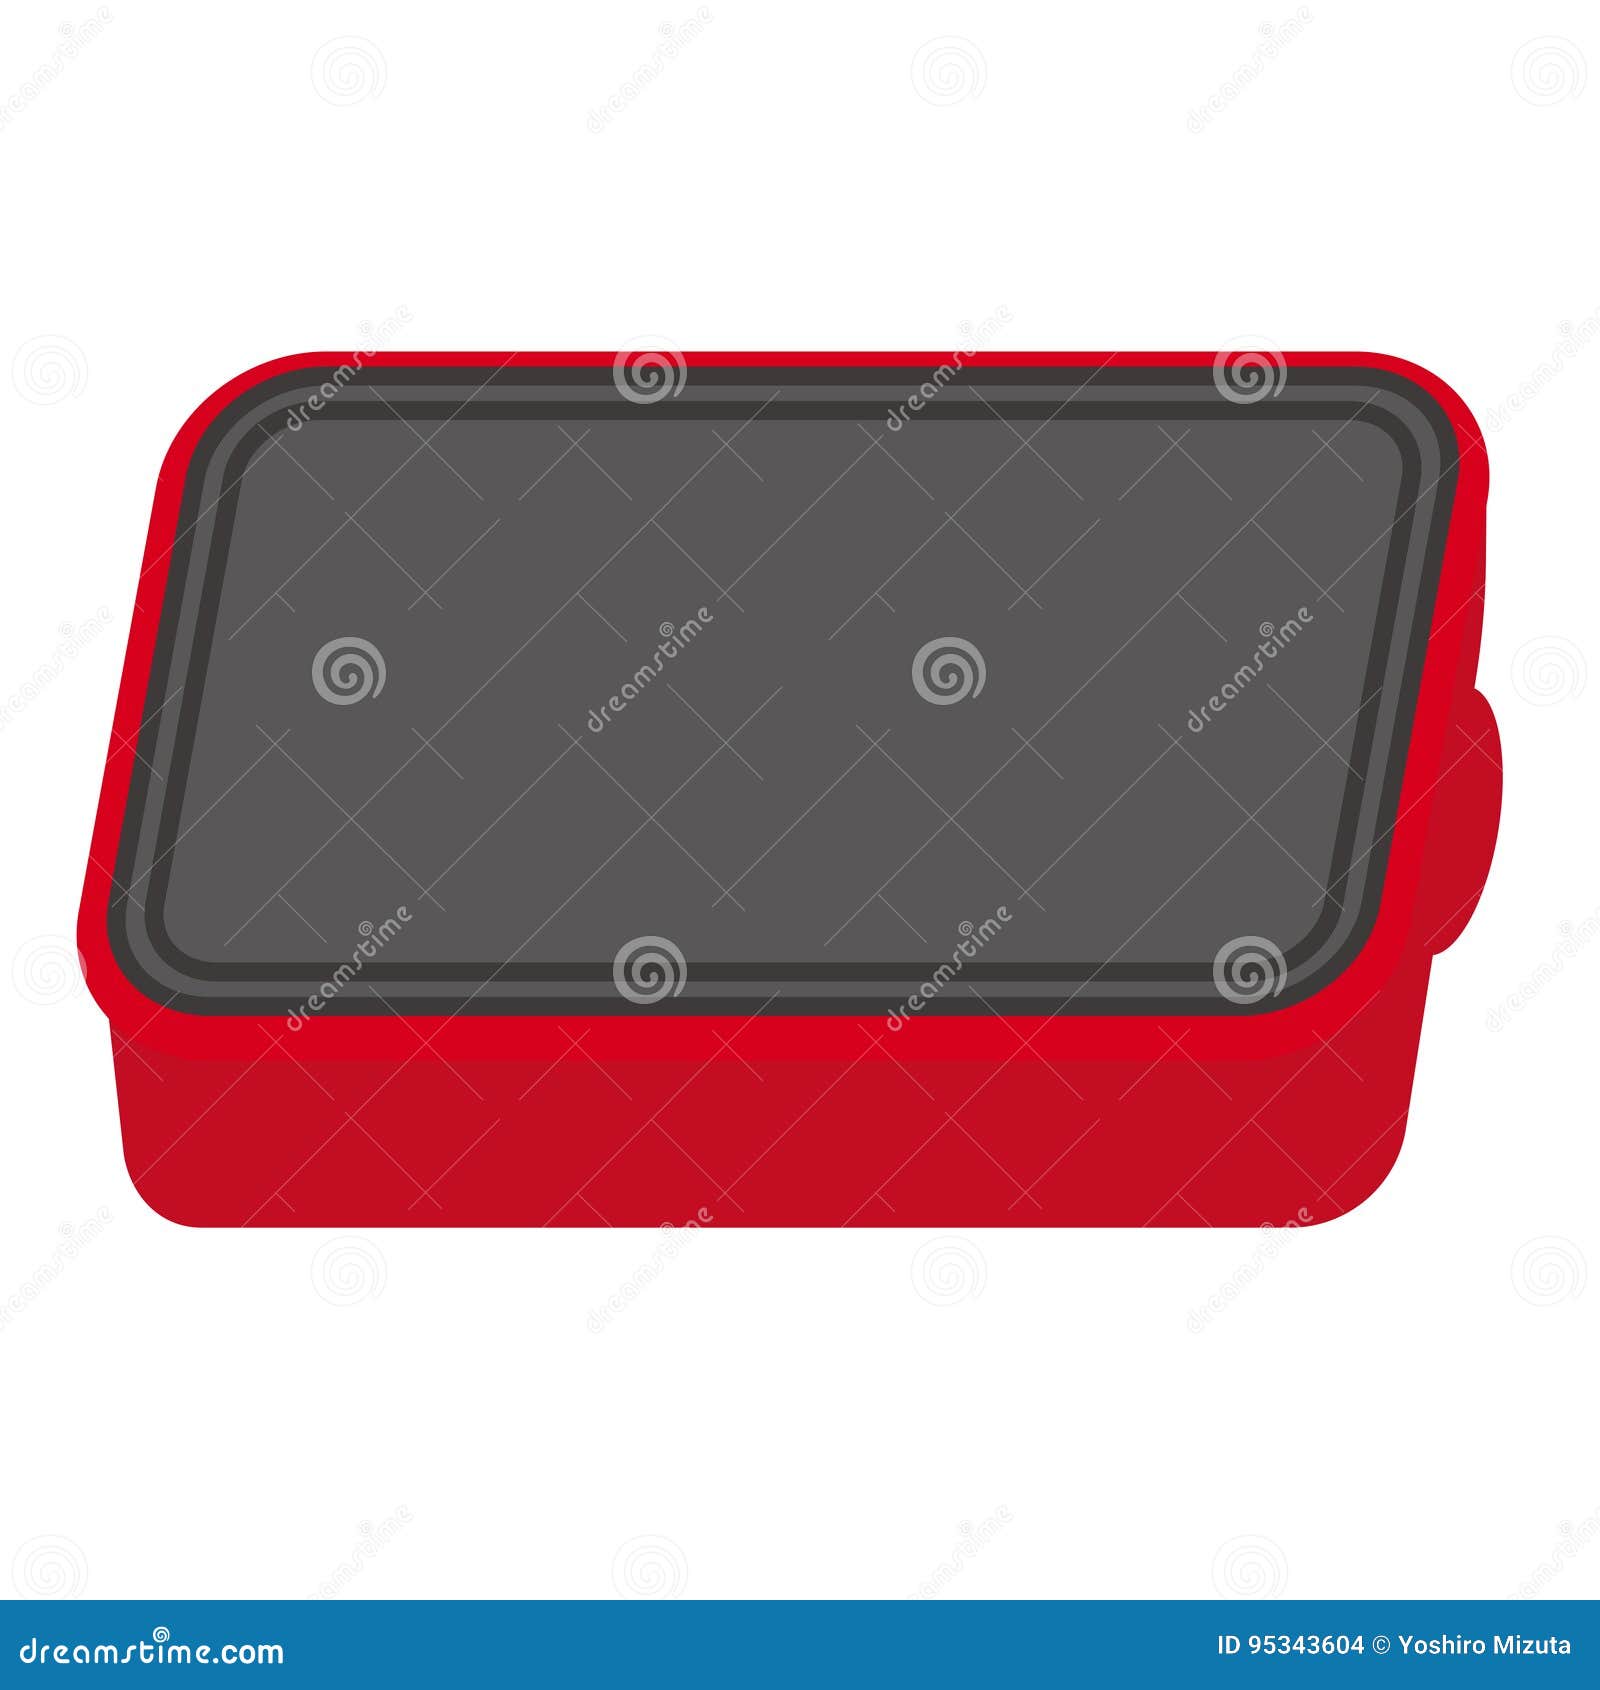 Hotplate Stock Vector Illustration and Royalty Free Hotplate Clipart